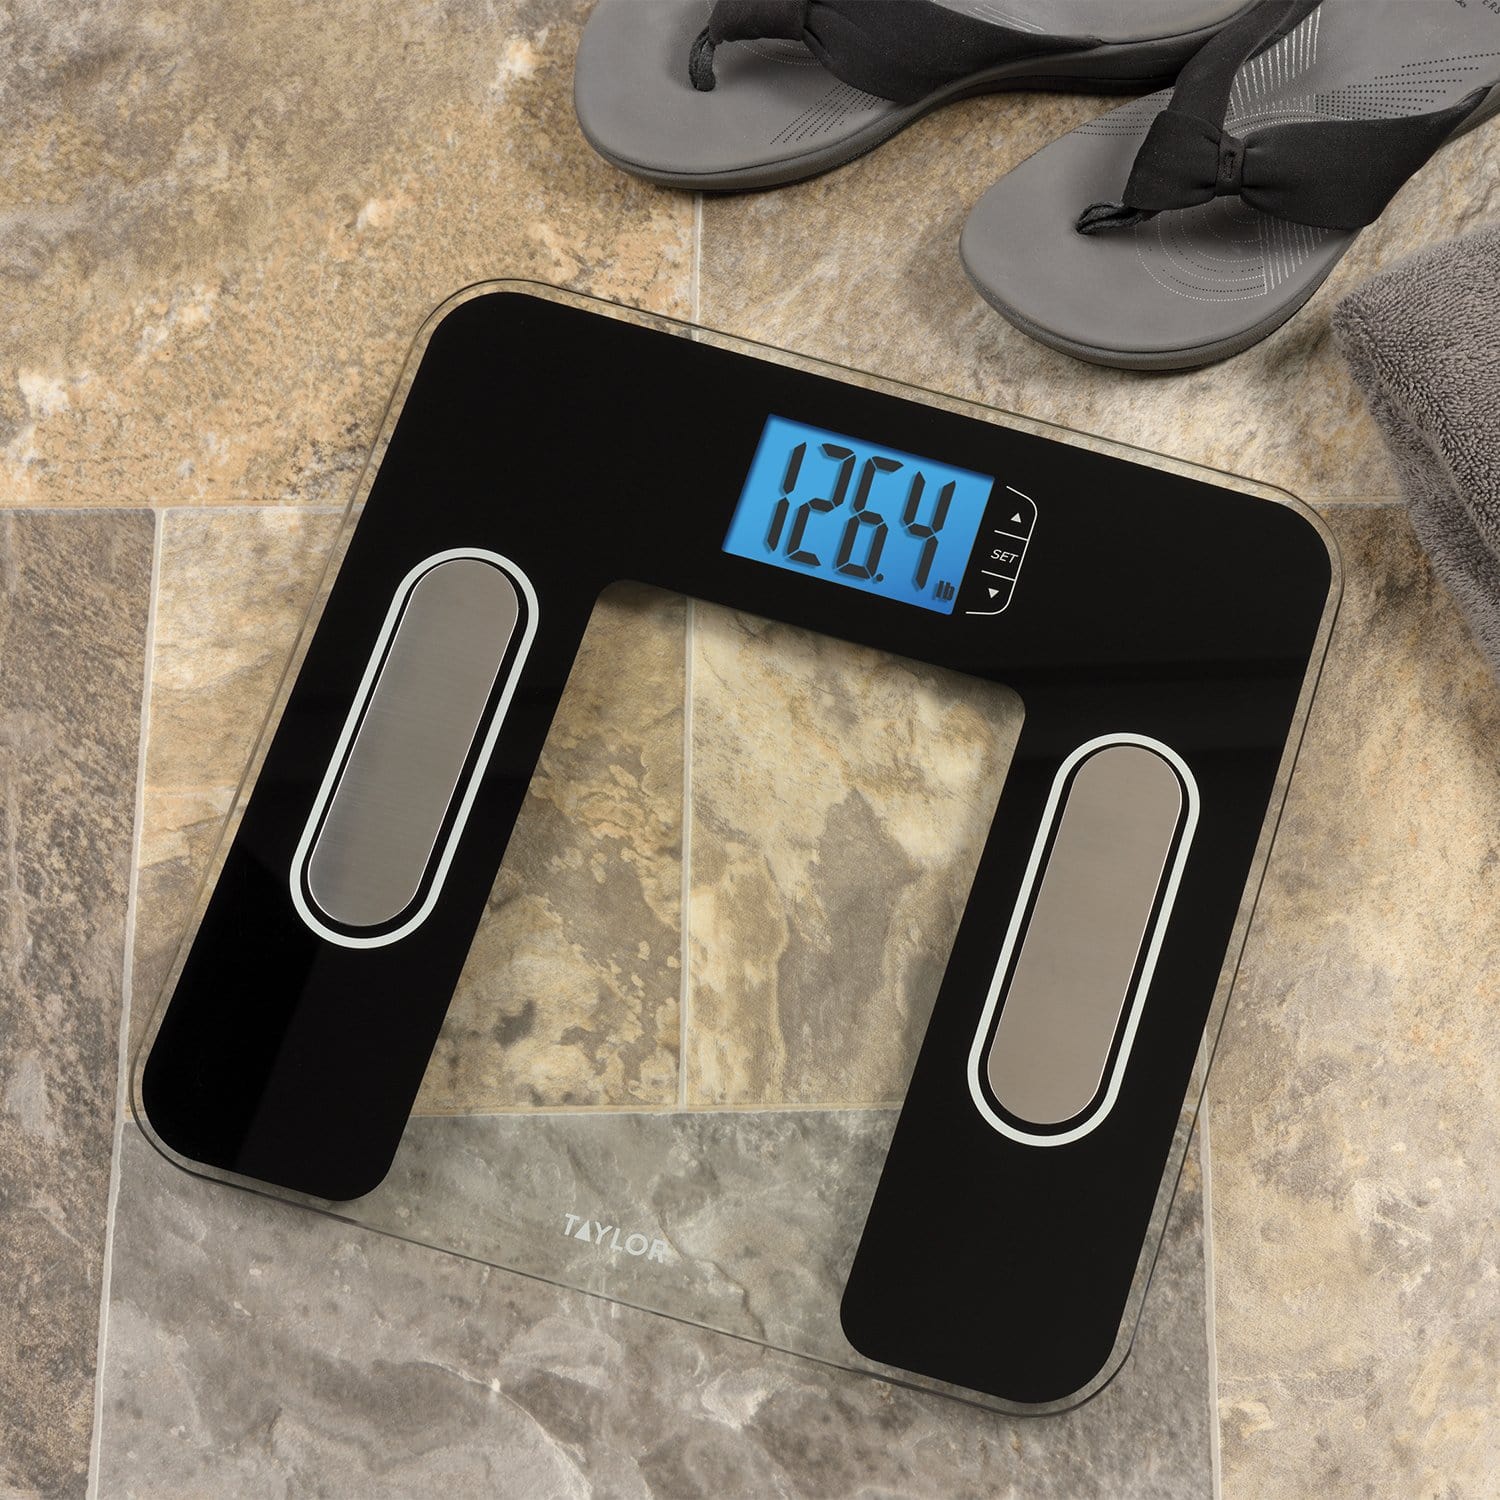 Digital Glass Scale with Stainless Steel Accents Clear - Taylor